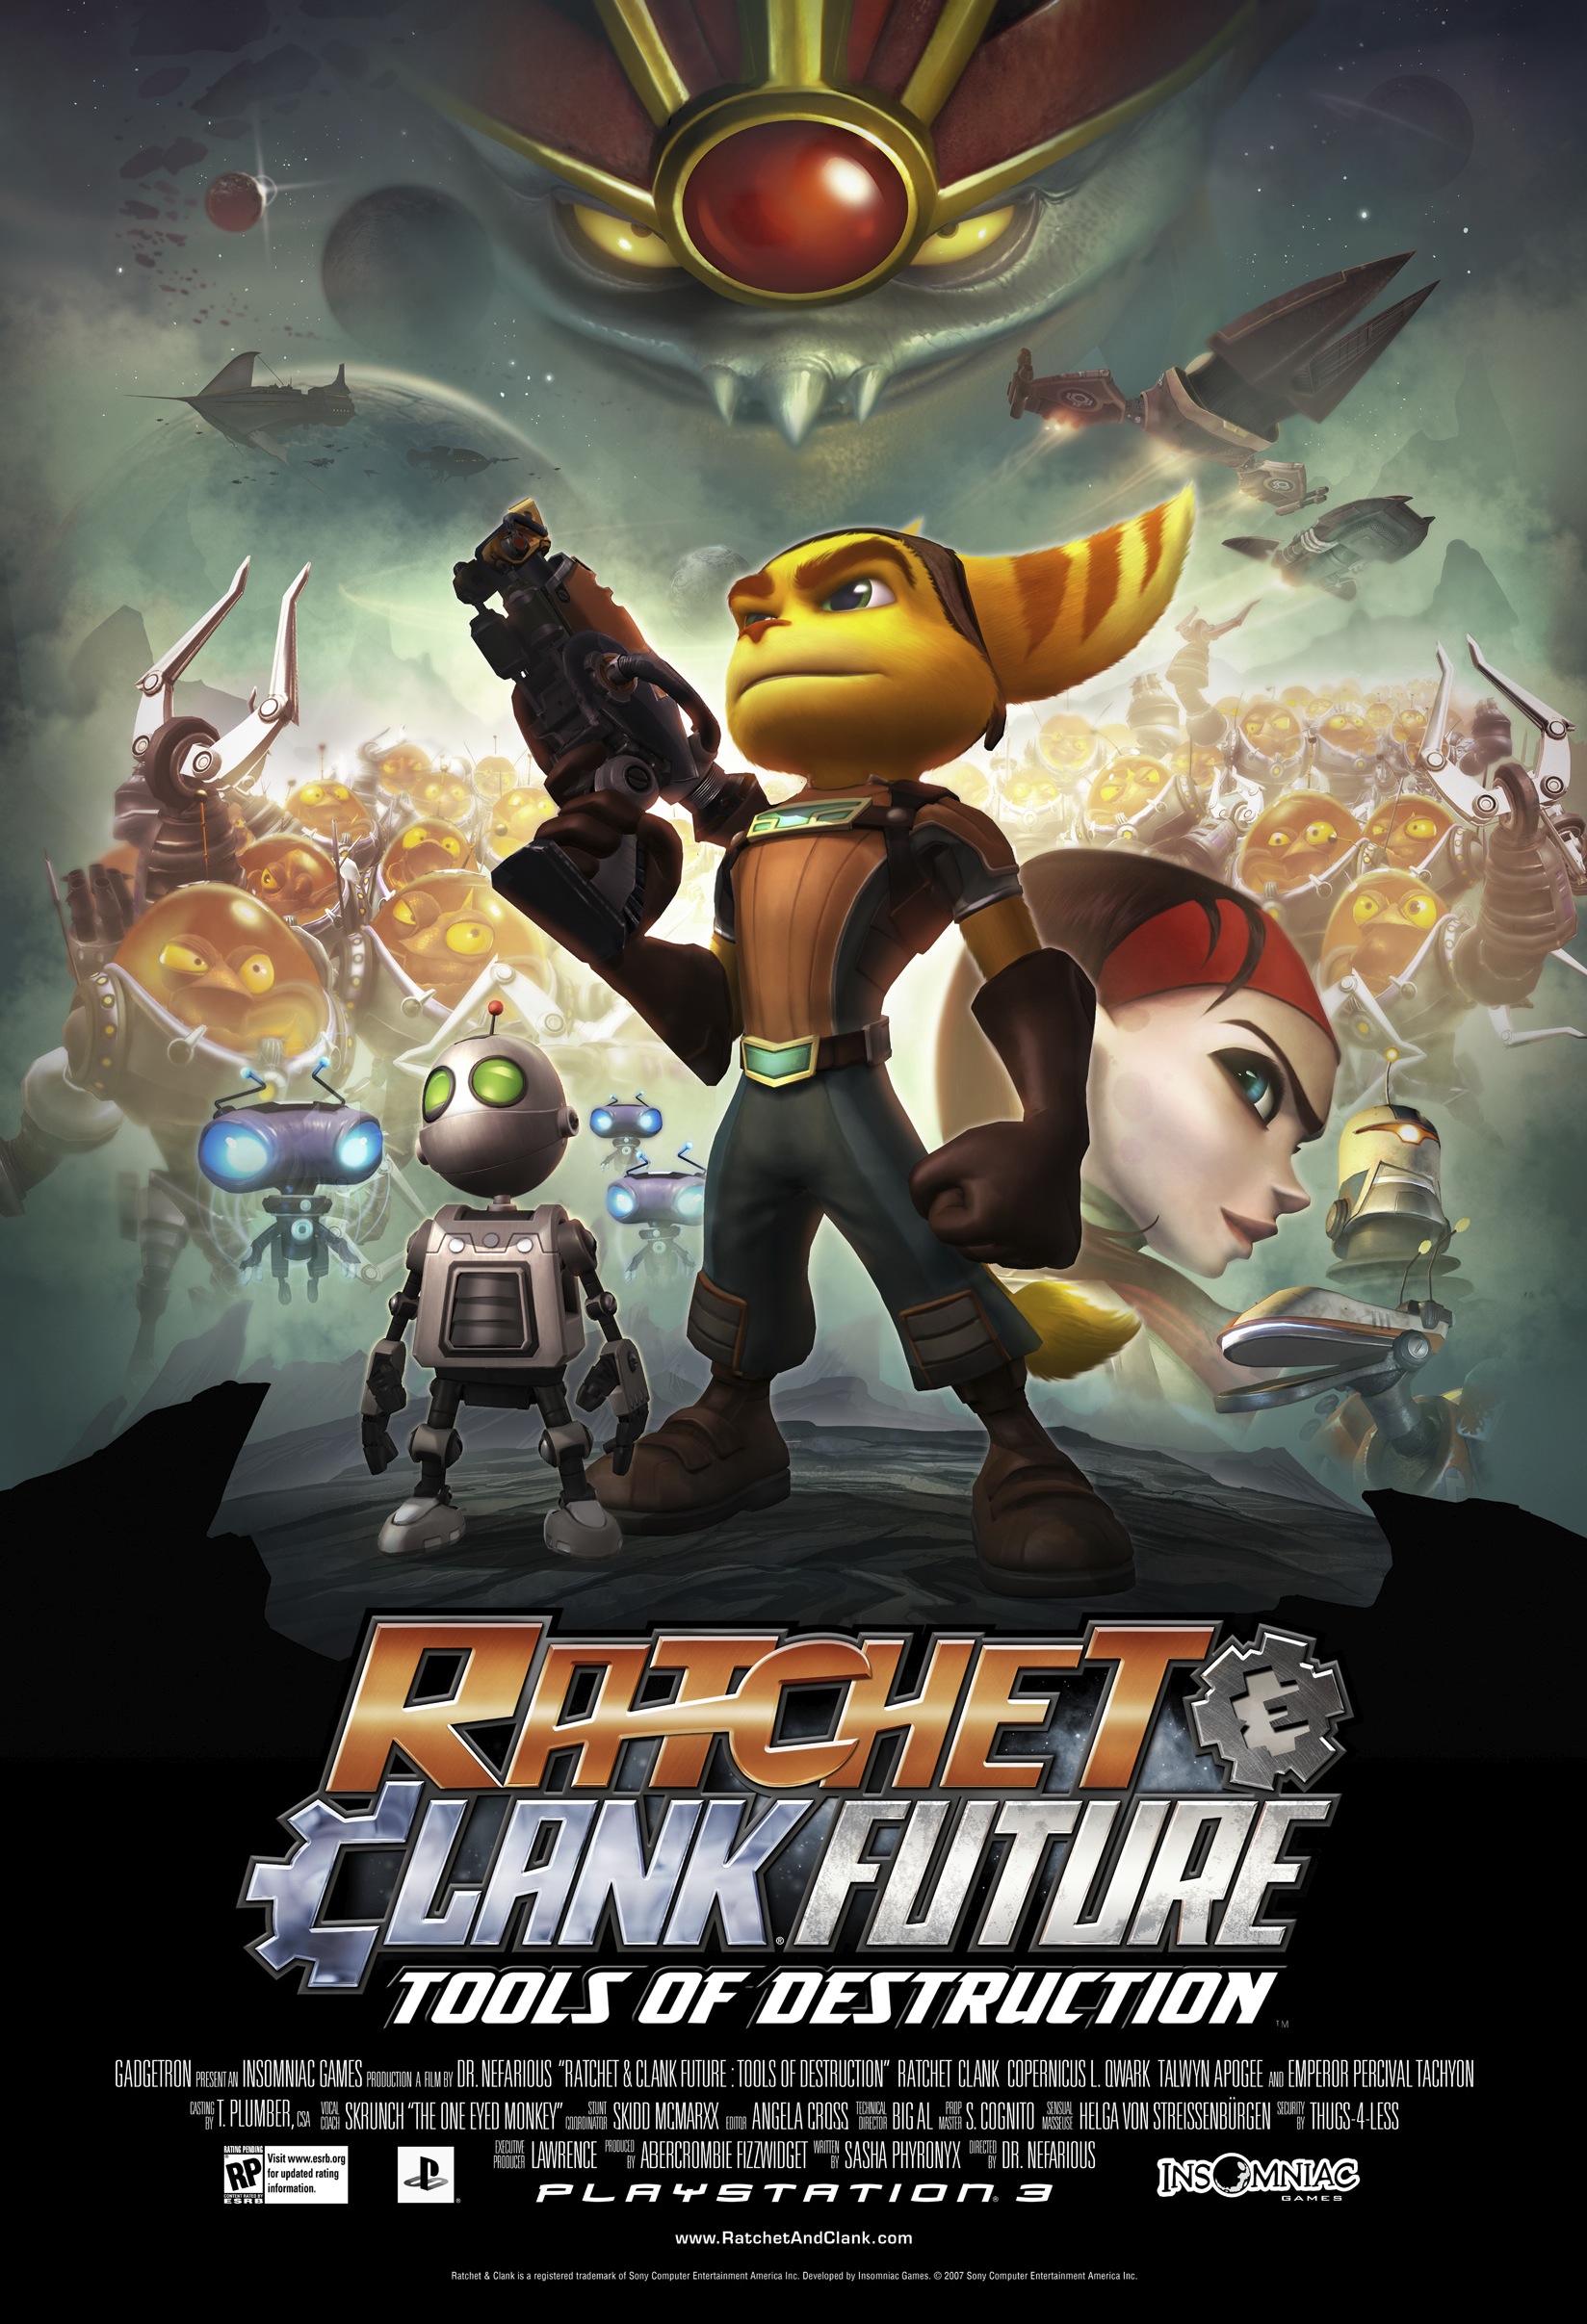 Soie Affiche Silk Print Poster 43inch x 24inch / 107cm x 60cm Ratchet and Clank 15E493 